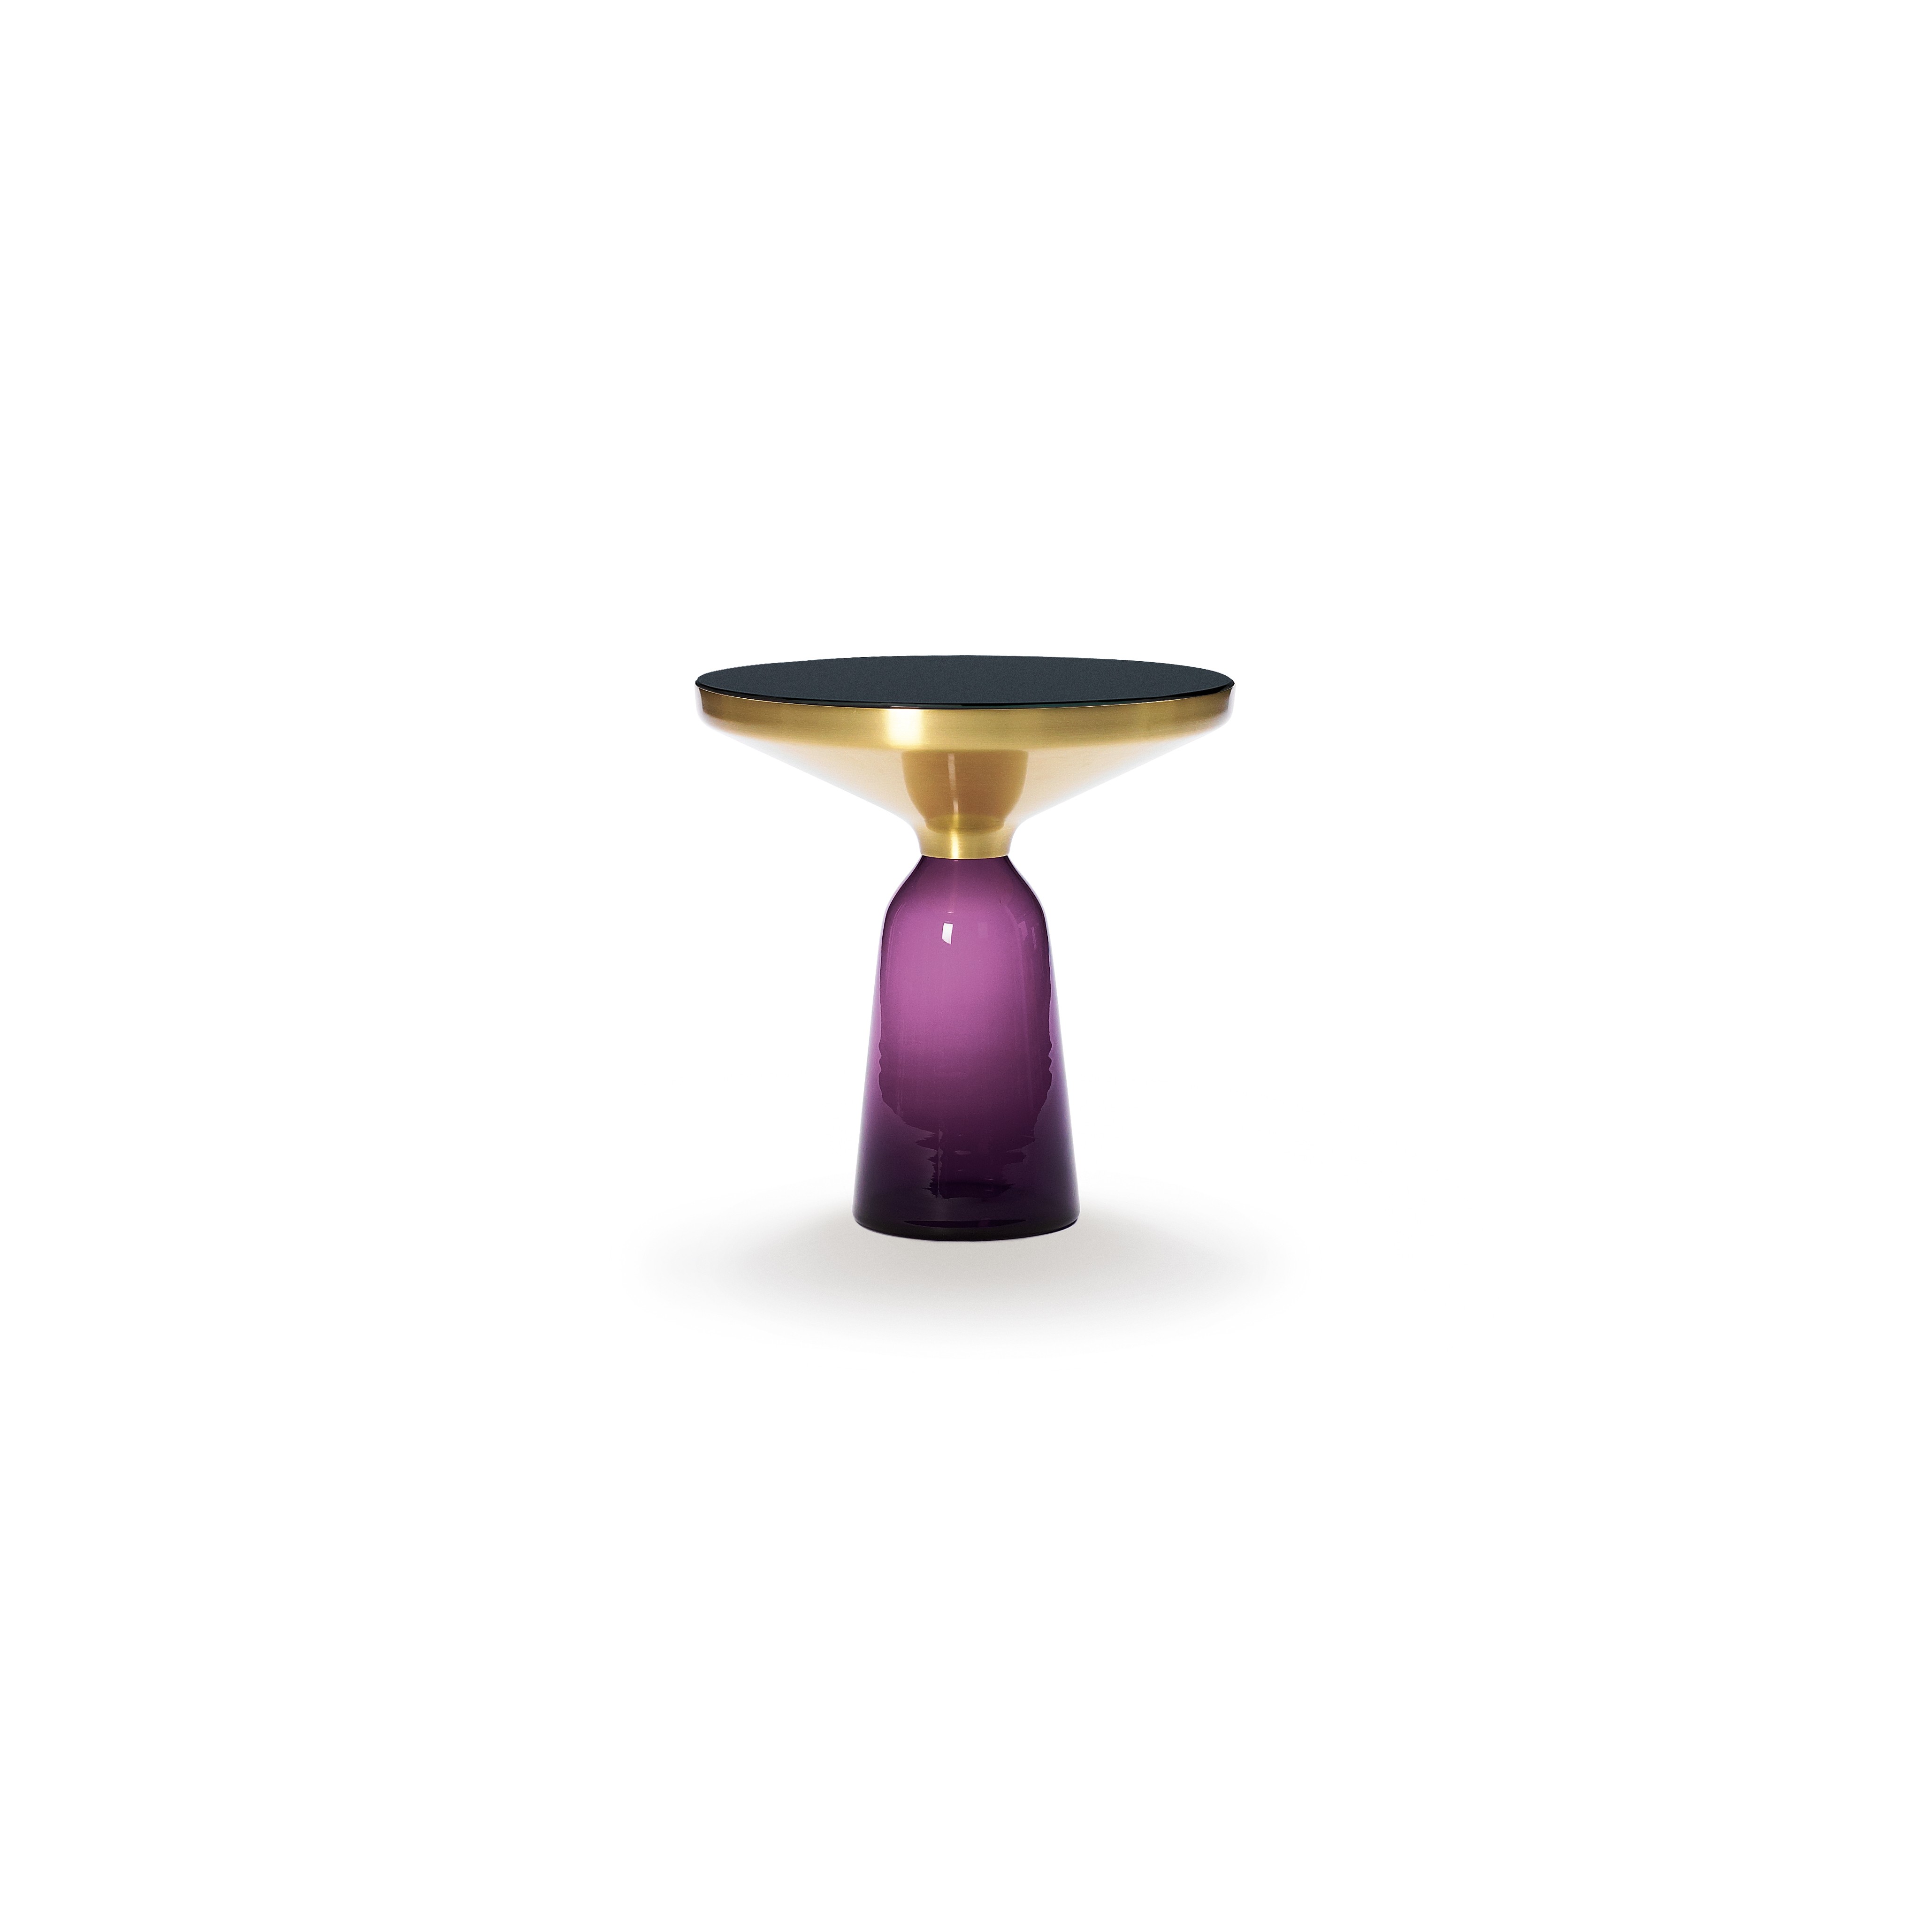 Pick from classic items such as the Eames moulded plywood table to the hand-blown Bell table by Sebastian Herkner